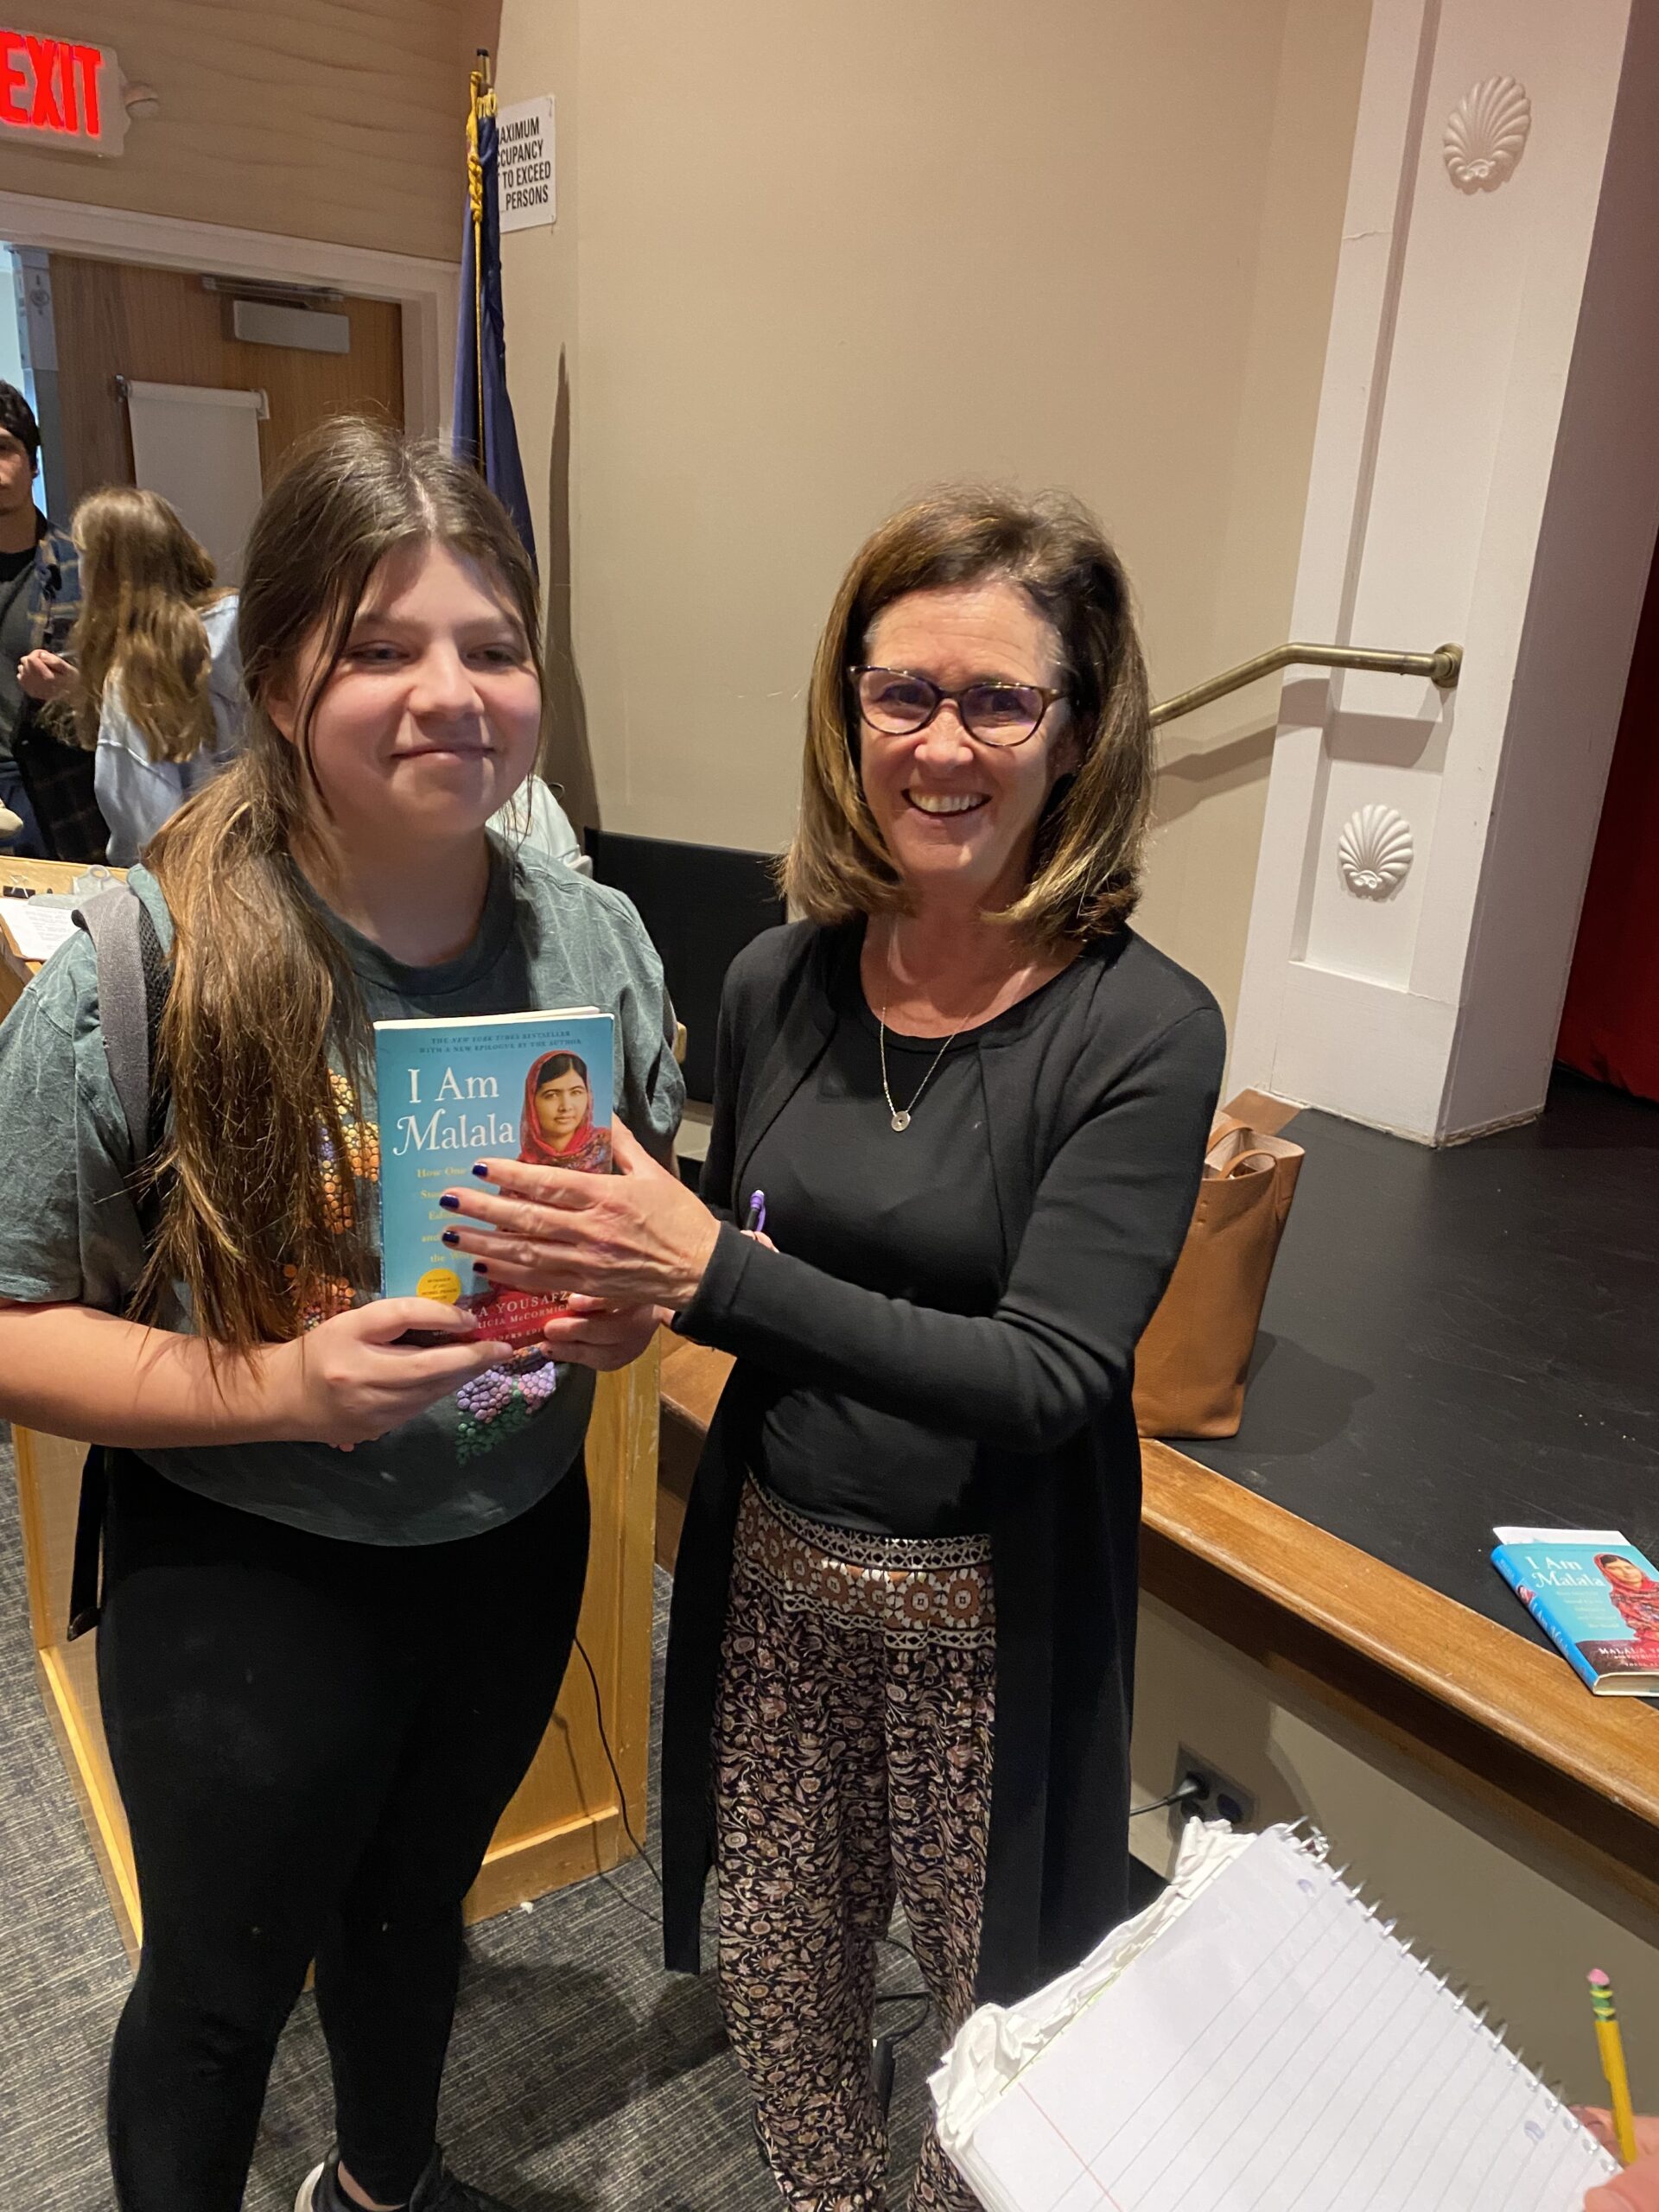 Patricia McCormick, co-author of “I am Malala” with Malala Yousafzai, was a guest speaker at Pierson Middle School recently. With her is seventh-grader Lia Mizrahi-DeMattei. COURTESY SAG HARBOR SCHOOL DISTRICT